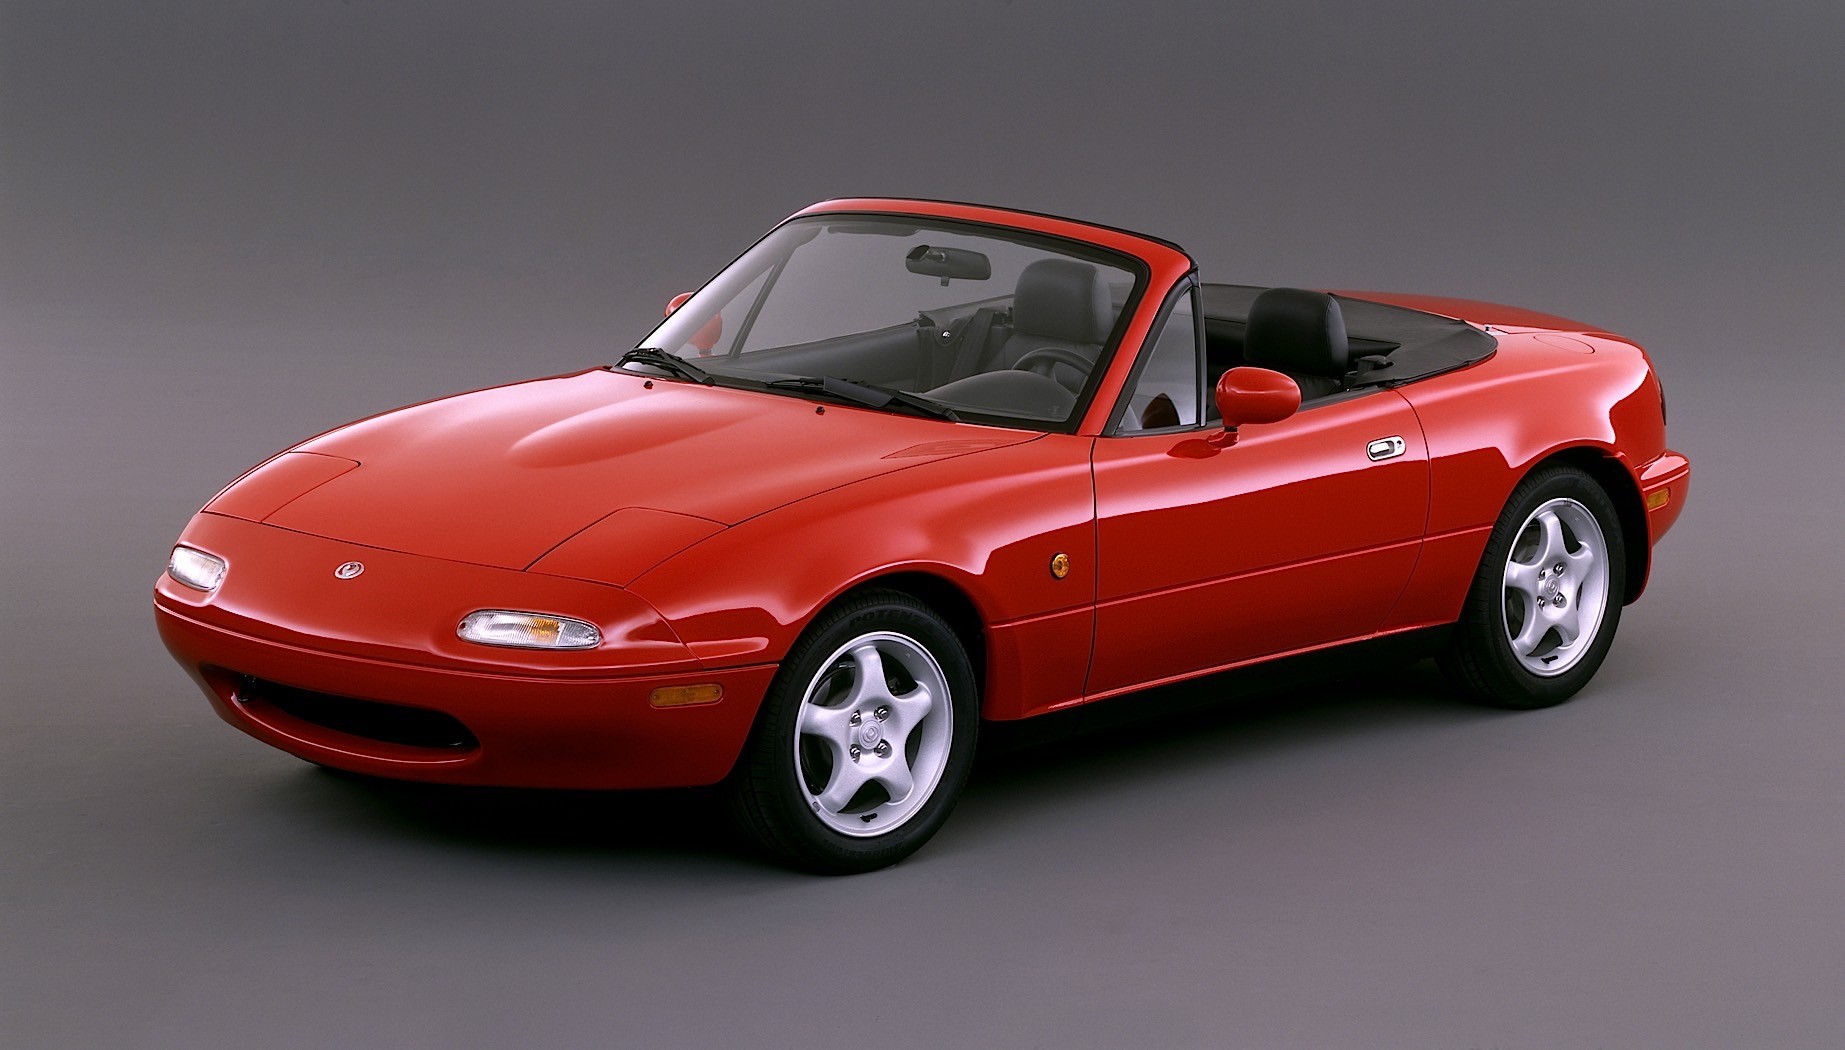 1989 Was One of the Greatest Years in Automotive History - autoevolution